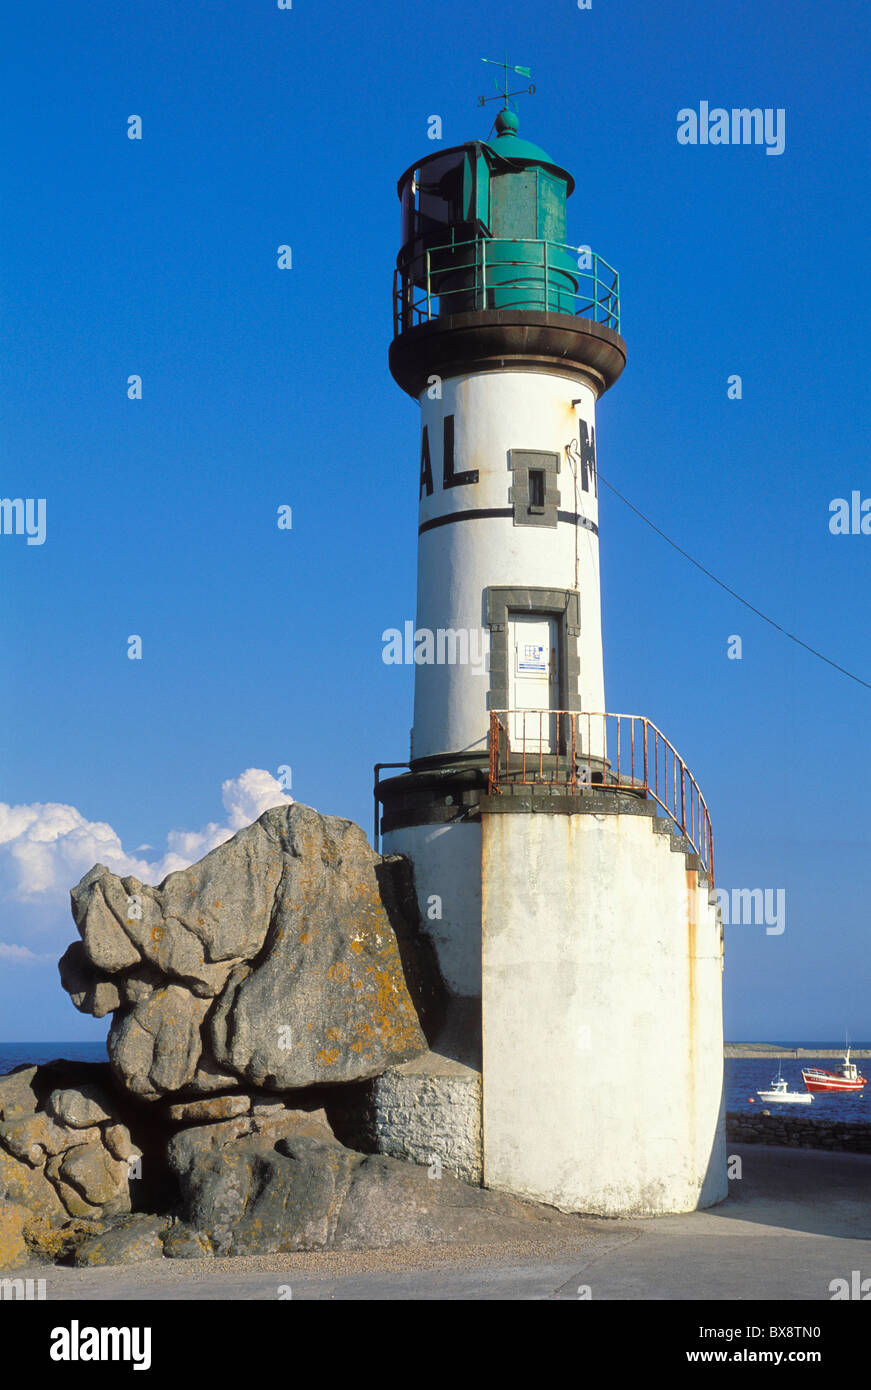 France, Brittany, Finistere, Sein Island, Men Brial Lighthouse Stock Photo